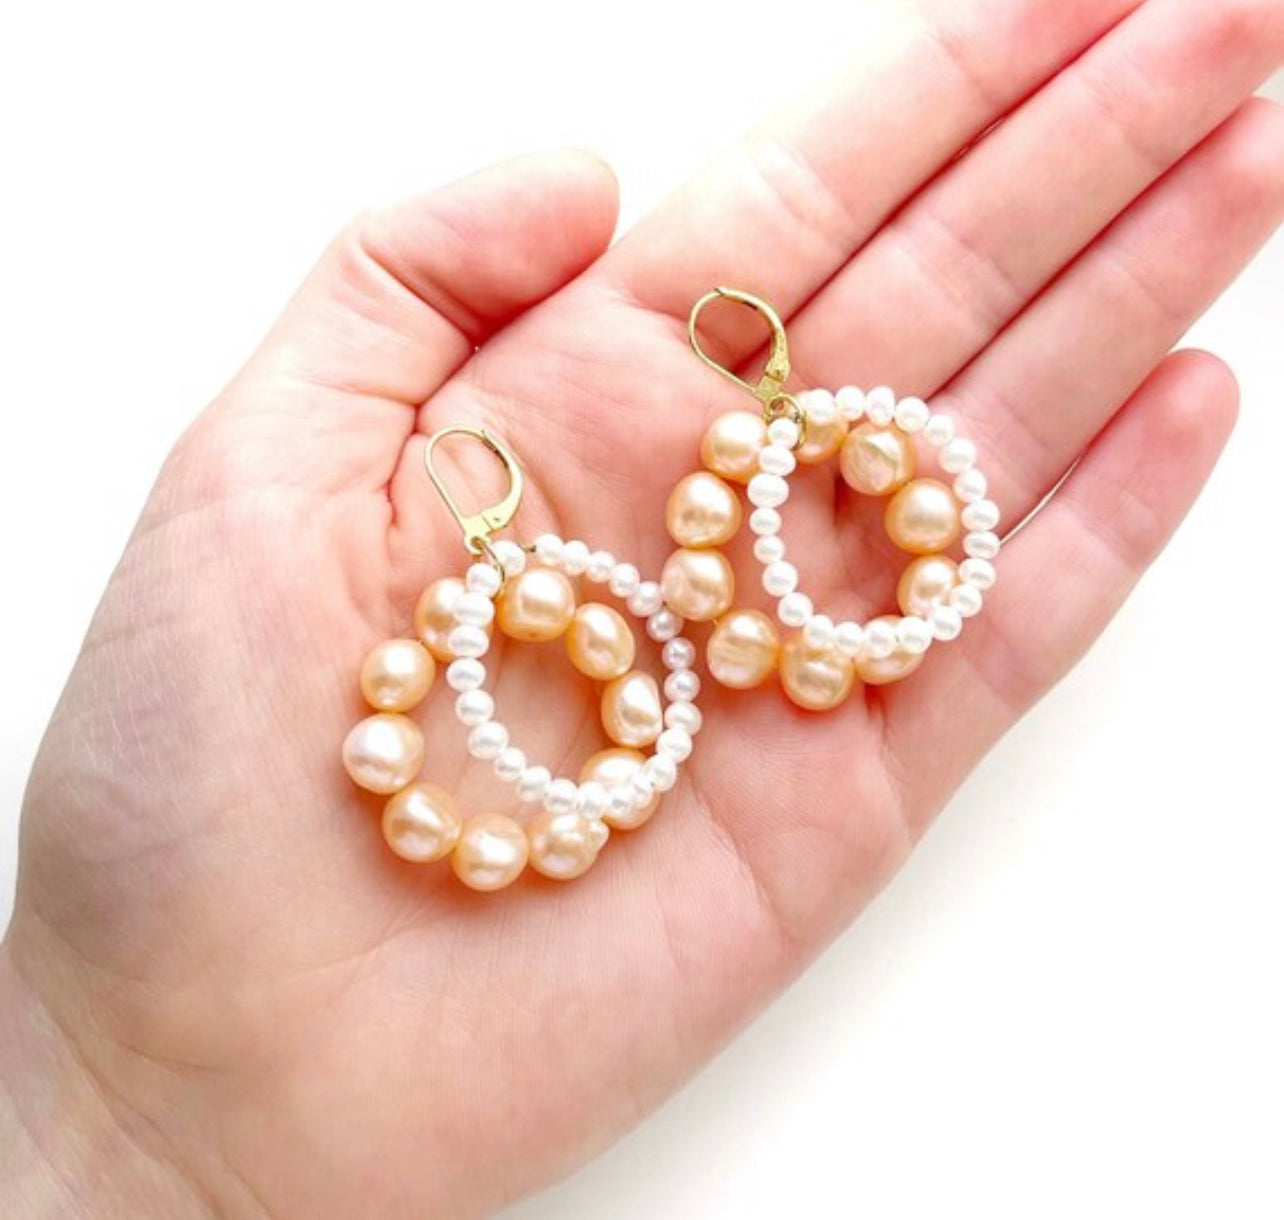 Unique pearl dangle and drop earrings, statement modern peach and white pearl hoop earrings